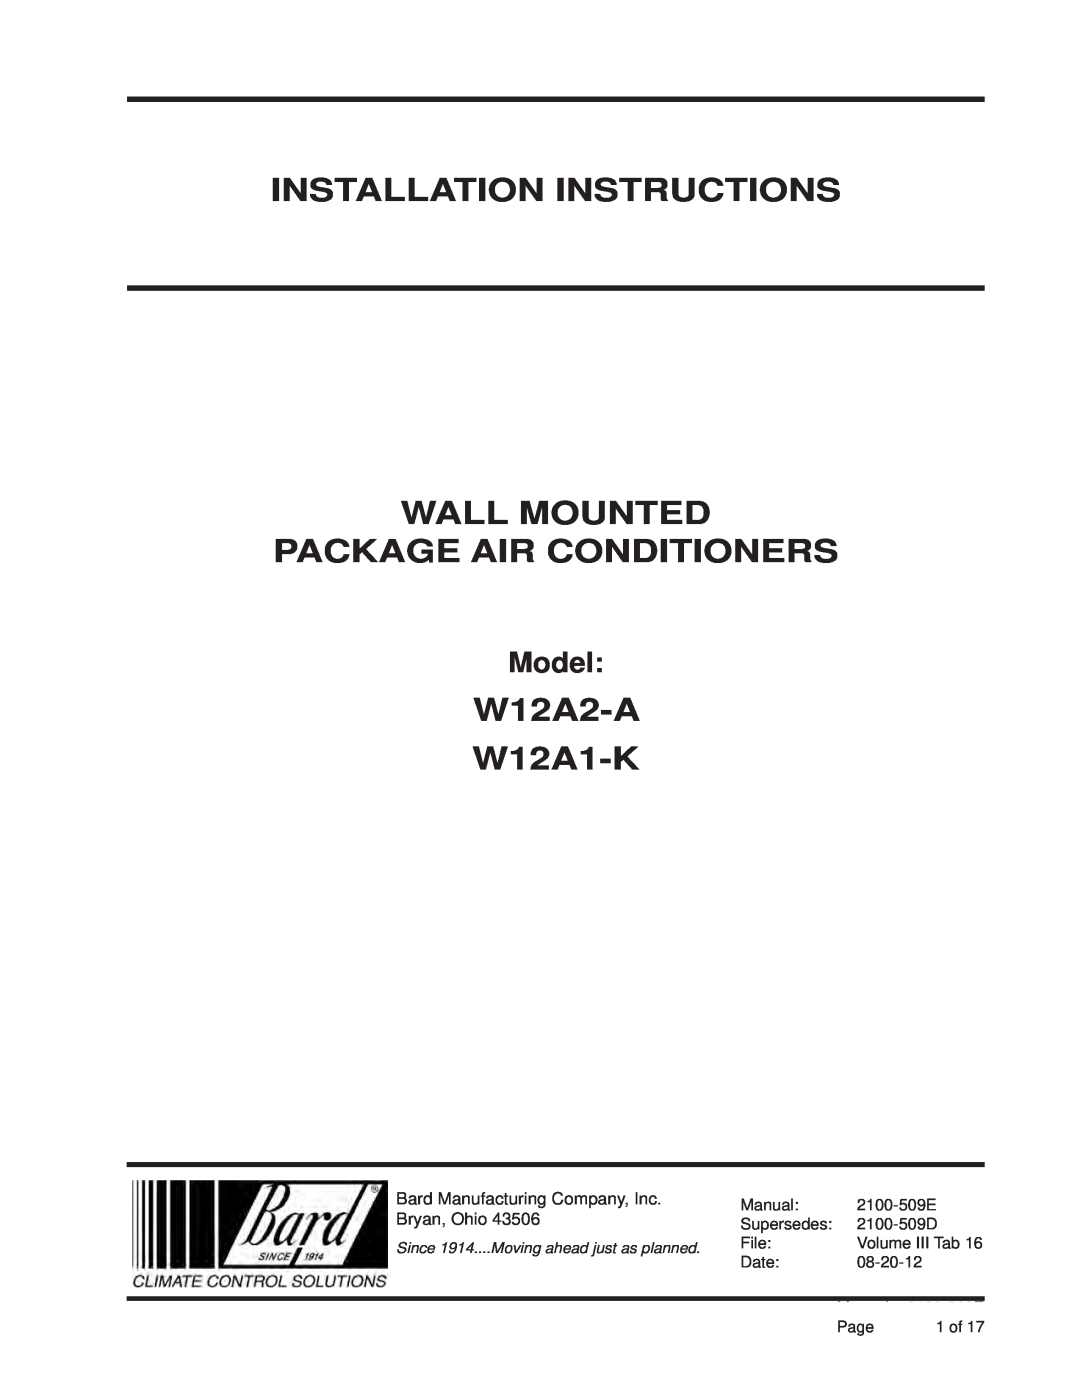 Bard installation instructions Installation Instructions Wall Mounted, Package Air Conditioners, W12A2-A W12A1-K, Model 